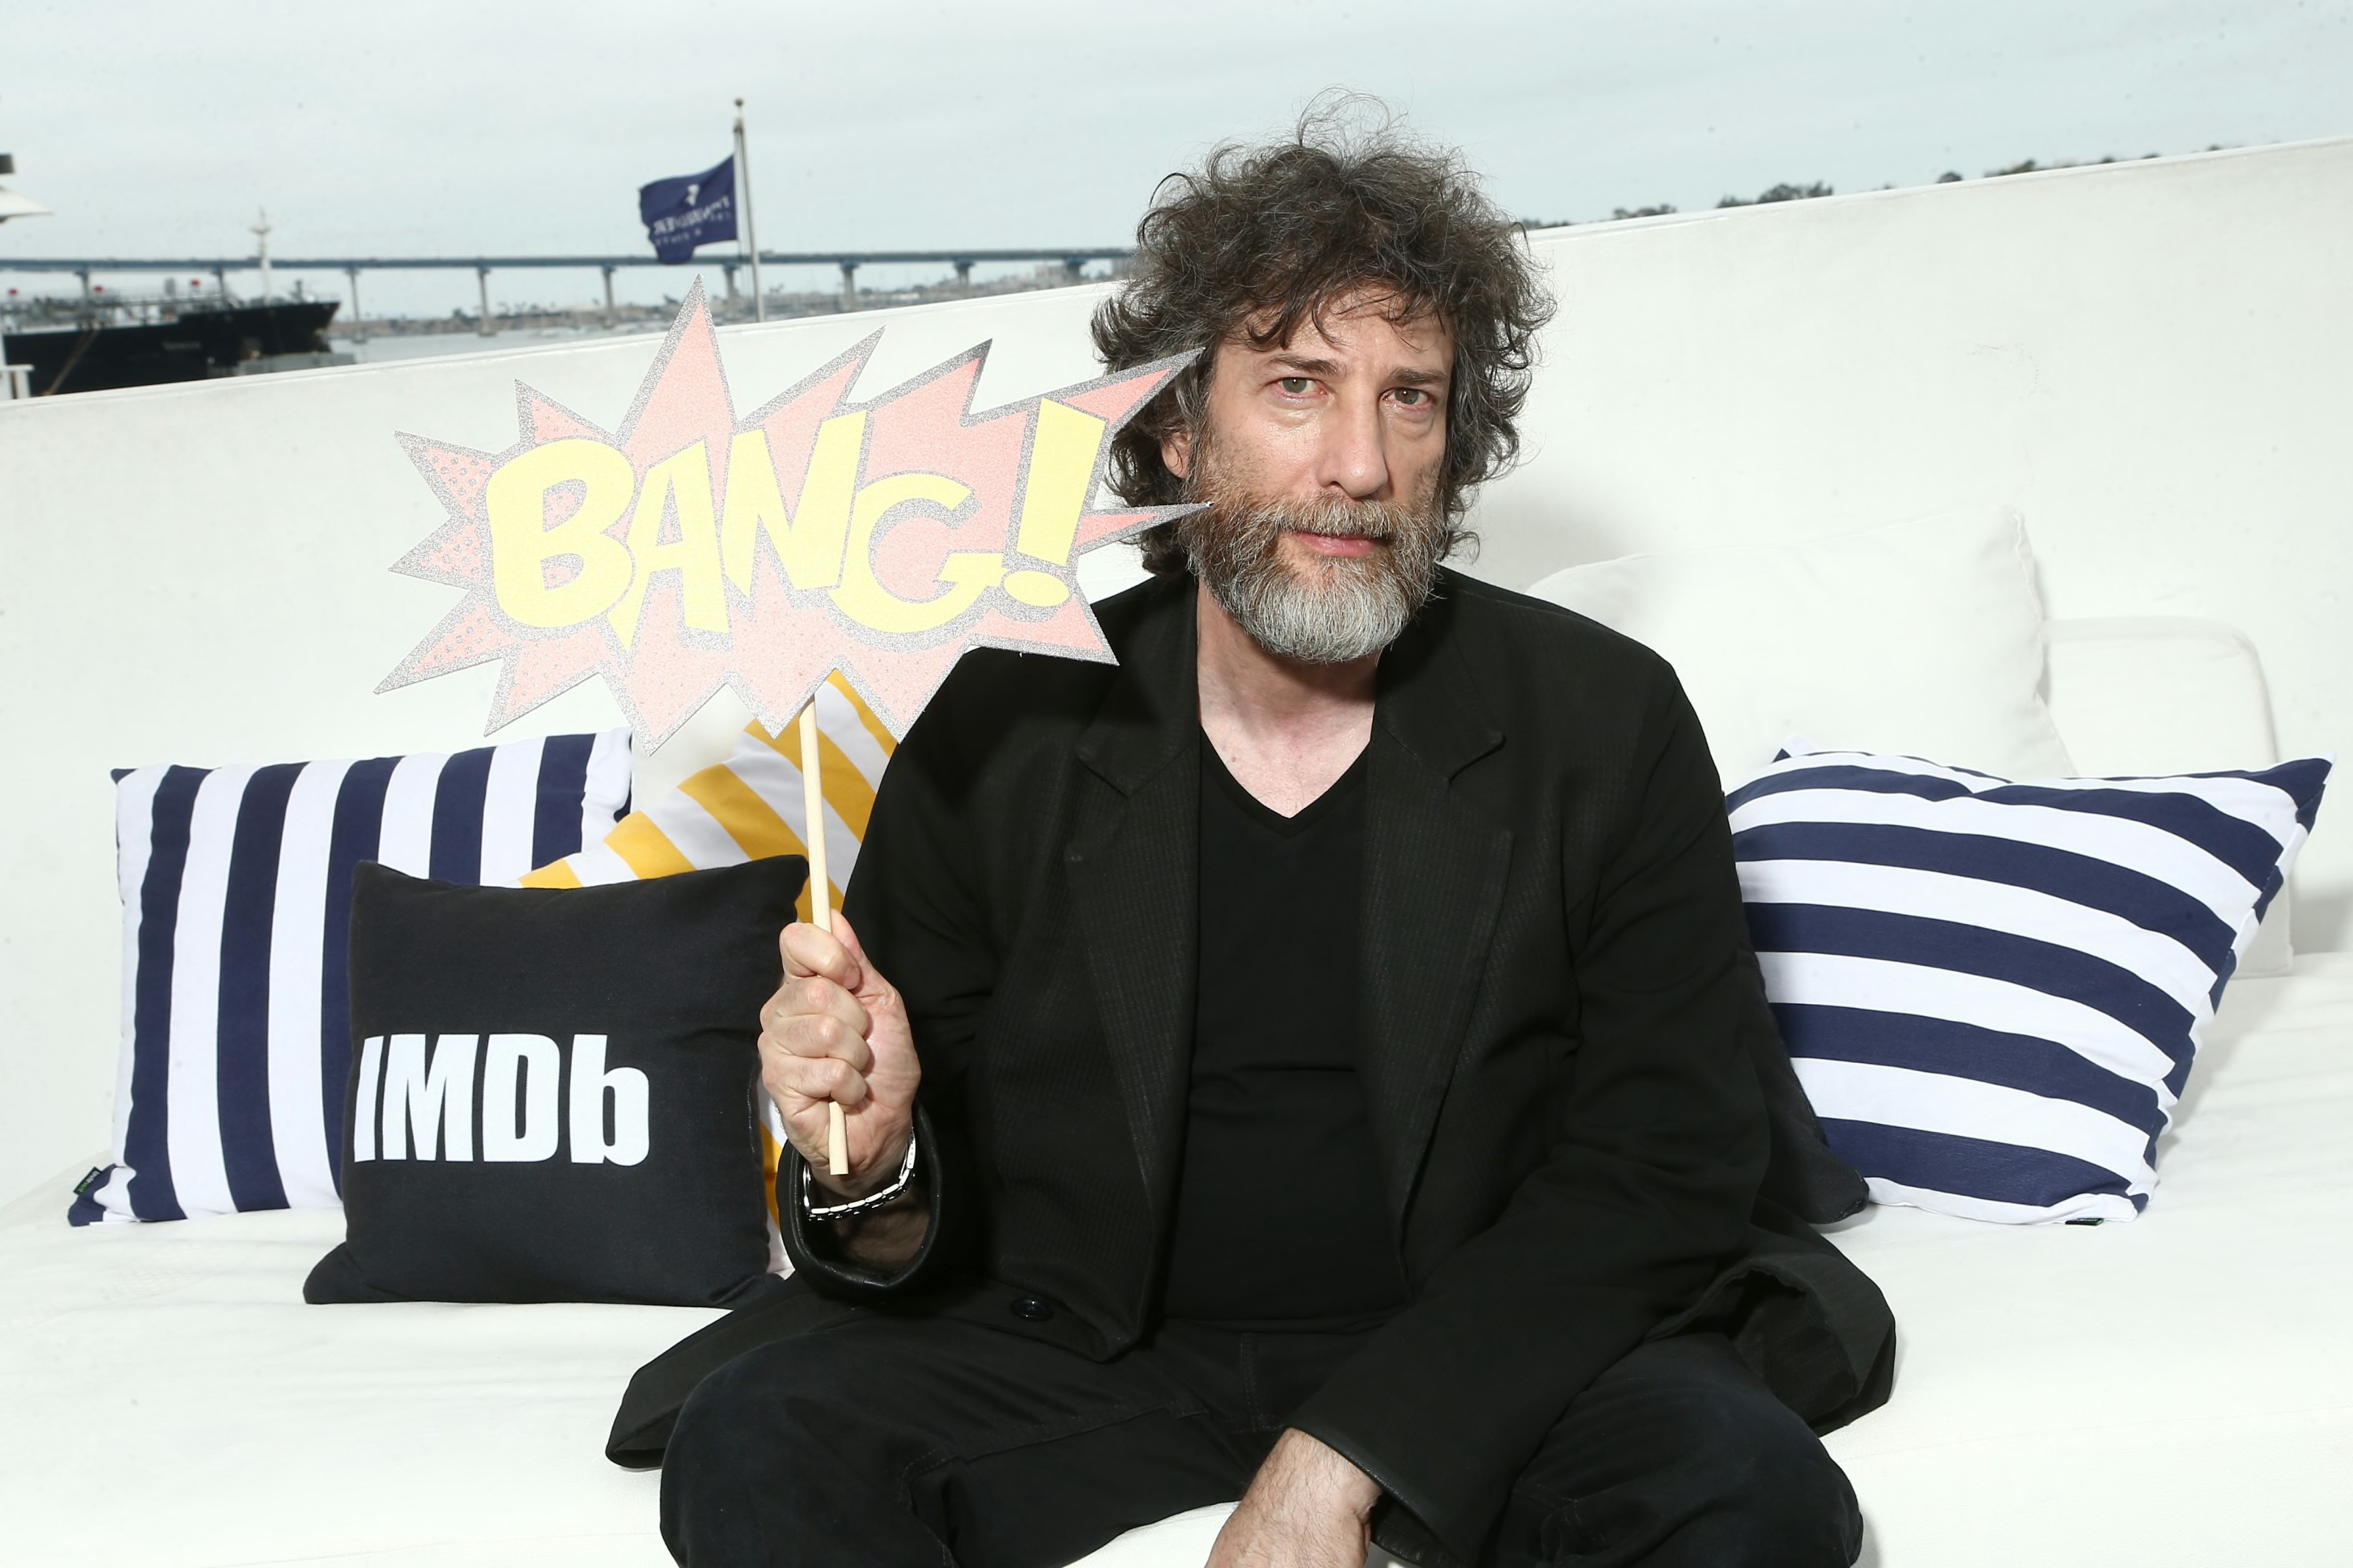 Neil Gaiman joins striking Hollywood writers: "These people need contracts"